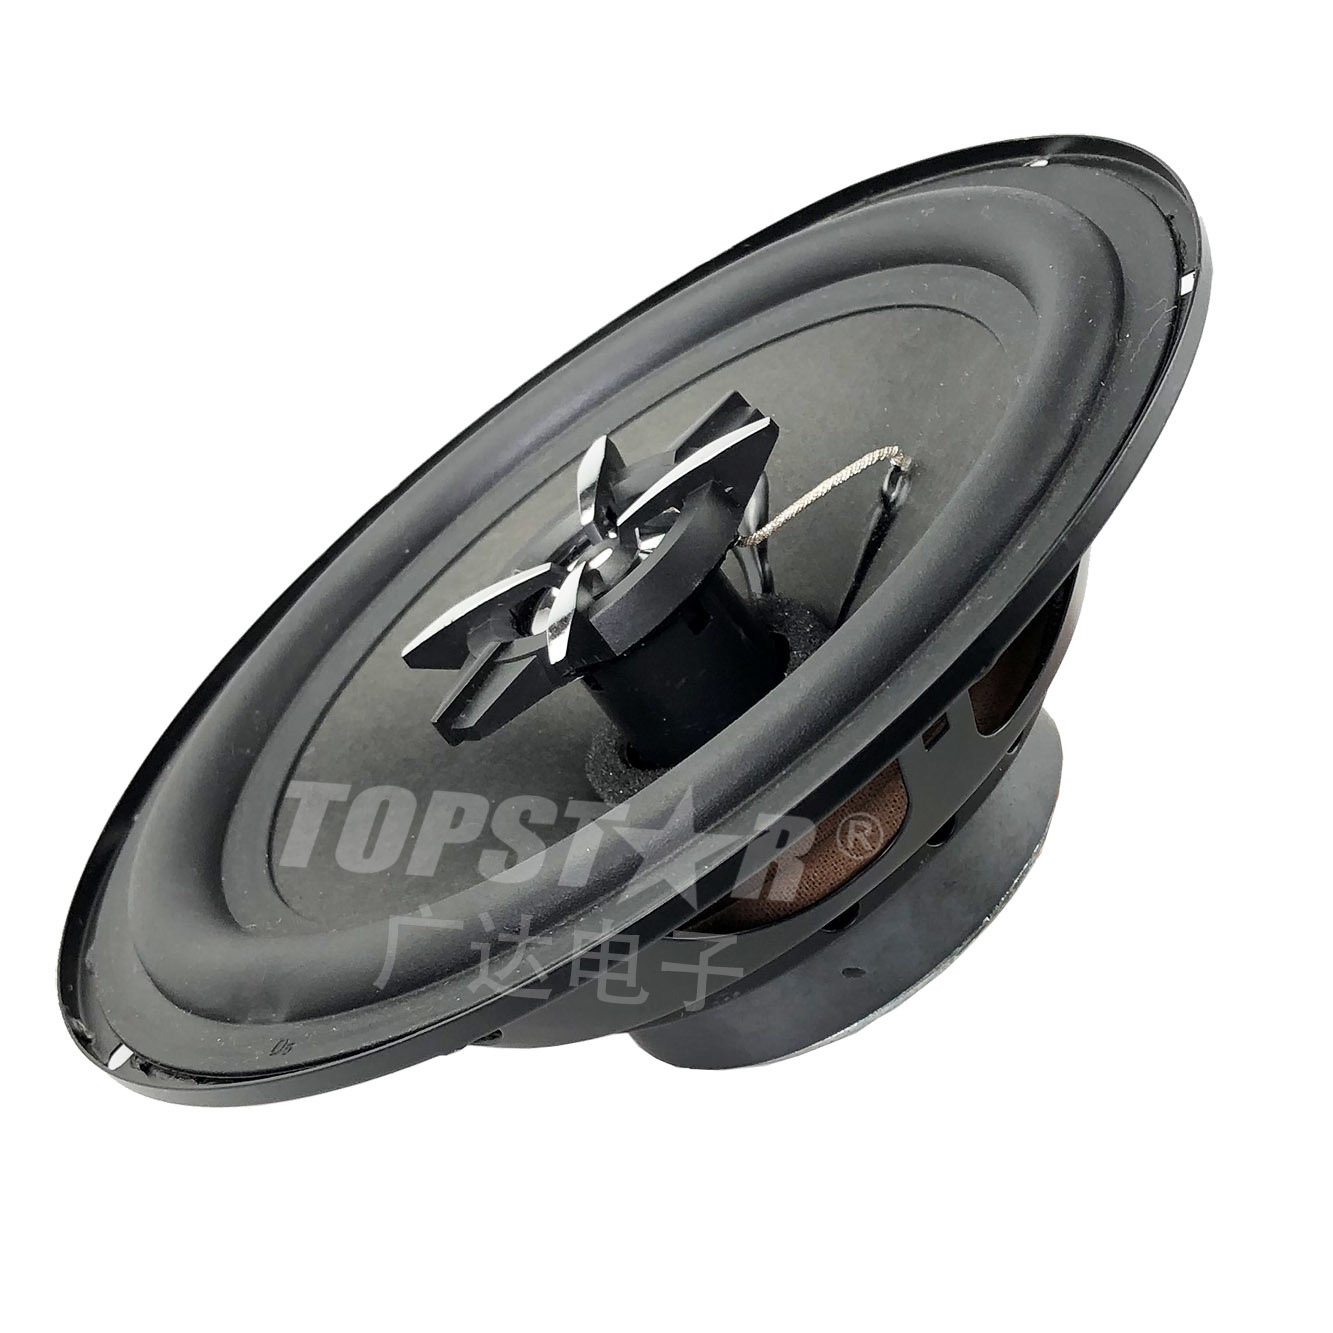 Coxial Car Sound Spakers 6.5′ Pr-652